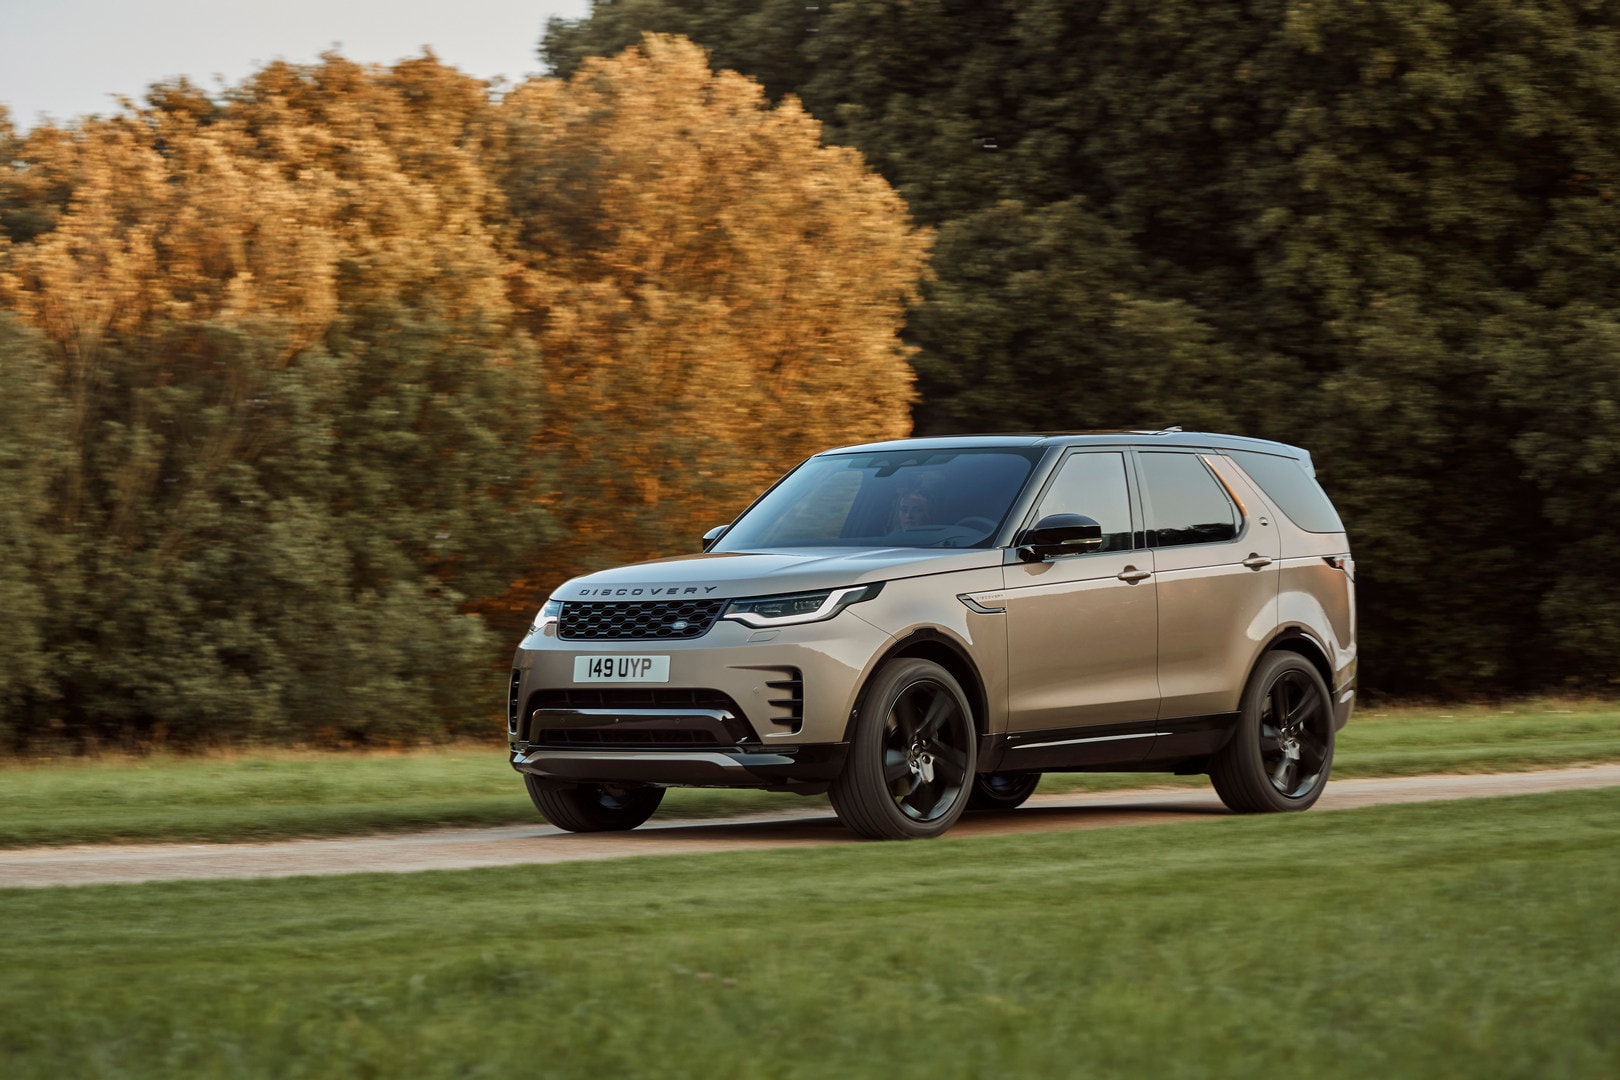 EVA and Pivi Share the 2021 Land Rover Discovery With R